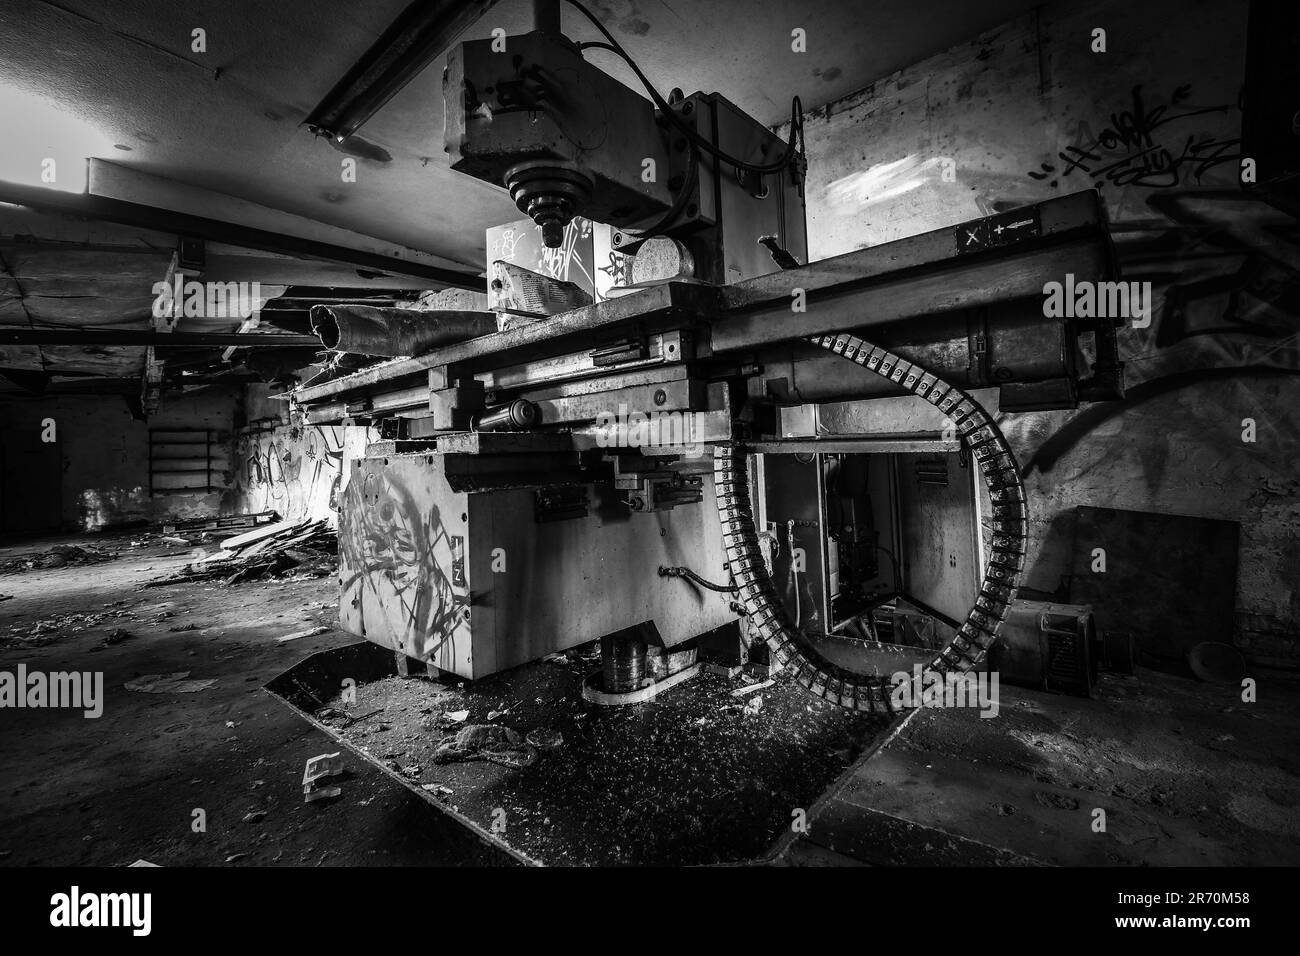 machinery in a lost place in black and white Stock Photo